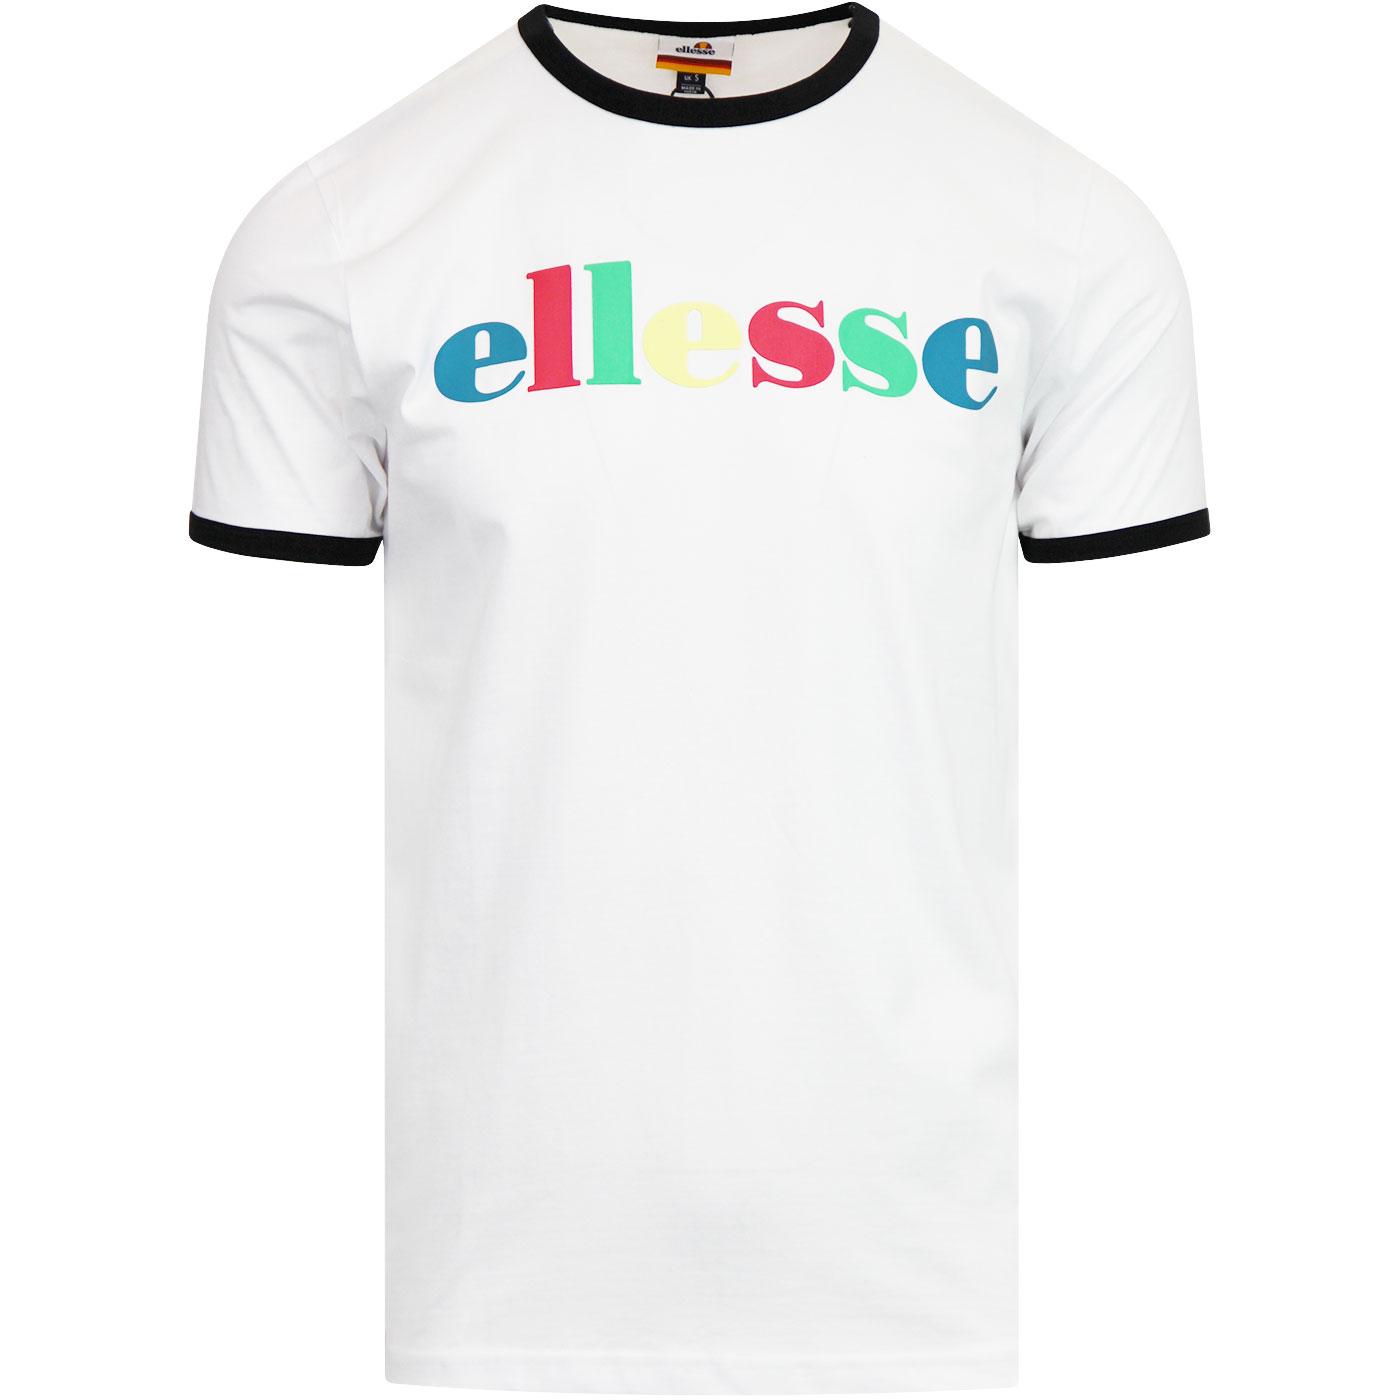 Moa ELLESSE Retro Colourful Text Indie Ringer Tee